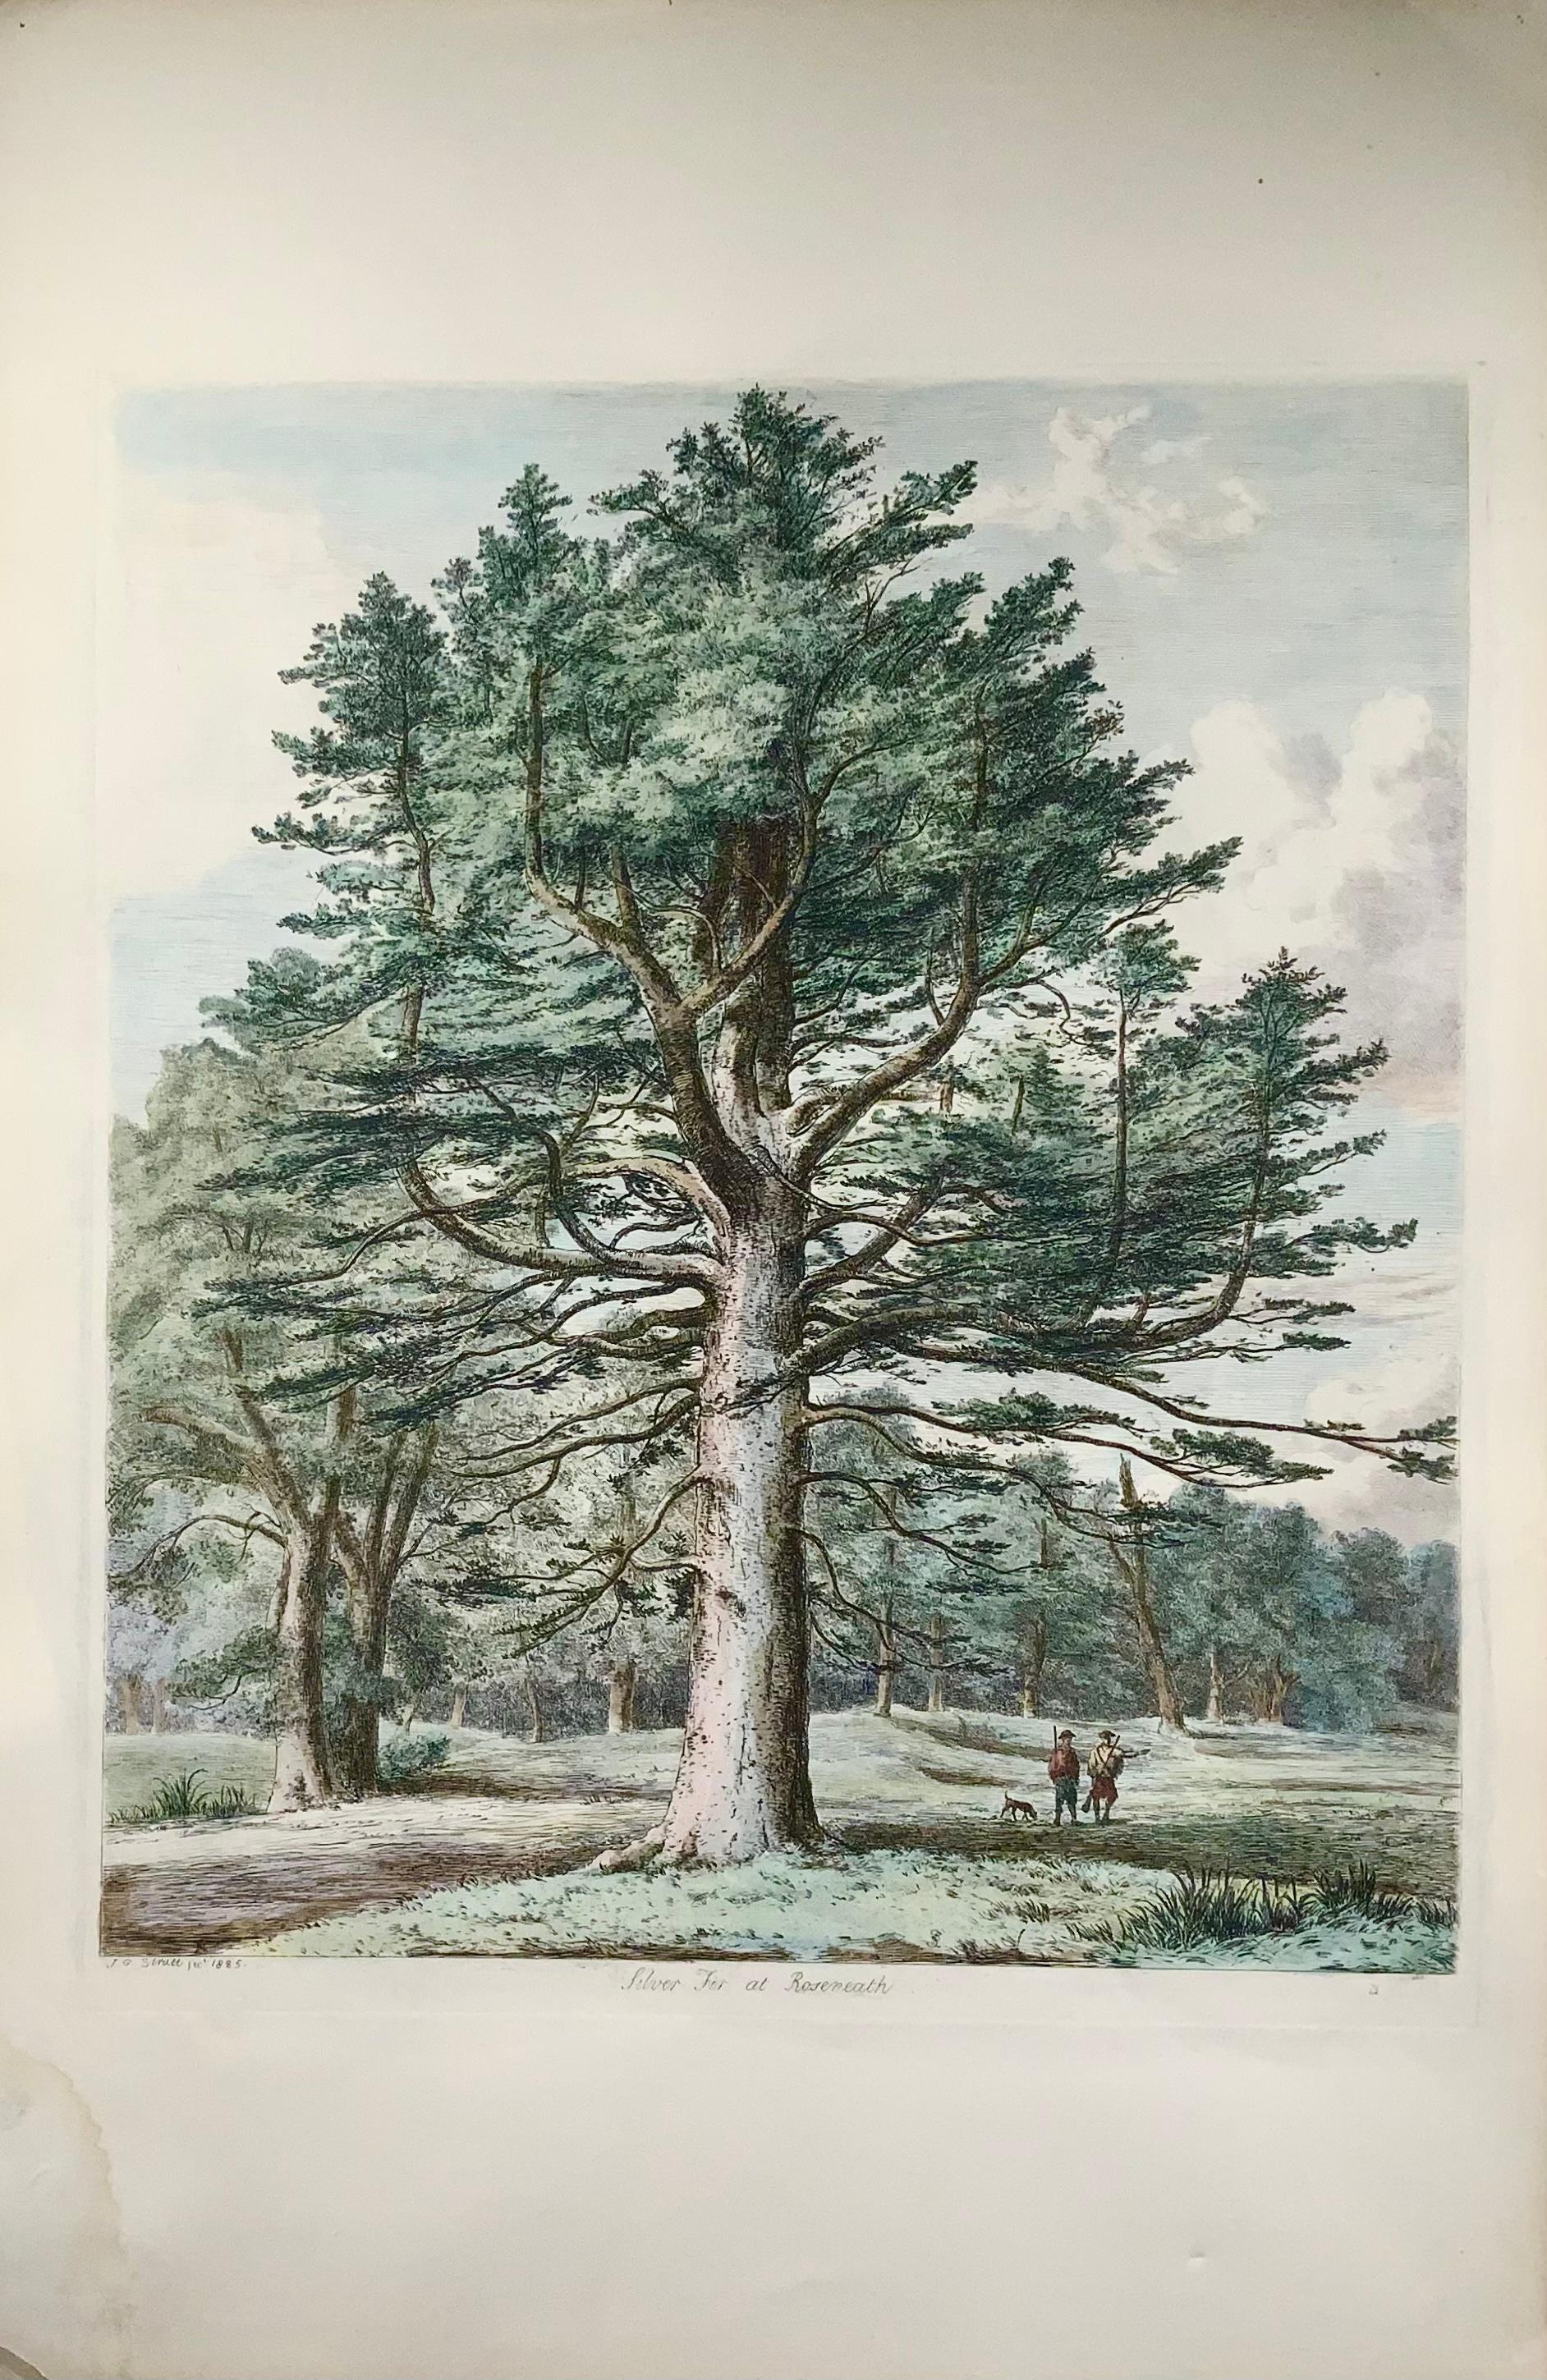 Sheet size: 55.4 x 36 cm

Etching with later colour. On wove paper.

Exceptionally etched sheet come from the first edition of Sylva Britannica.

Jacob George Strutt (1784-1867) was a landscape painter and etcher by training, rather than a